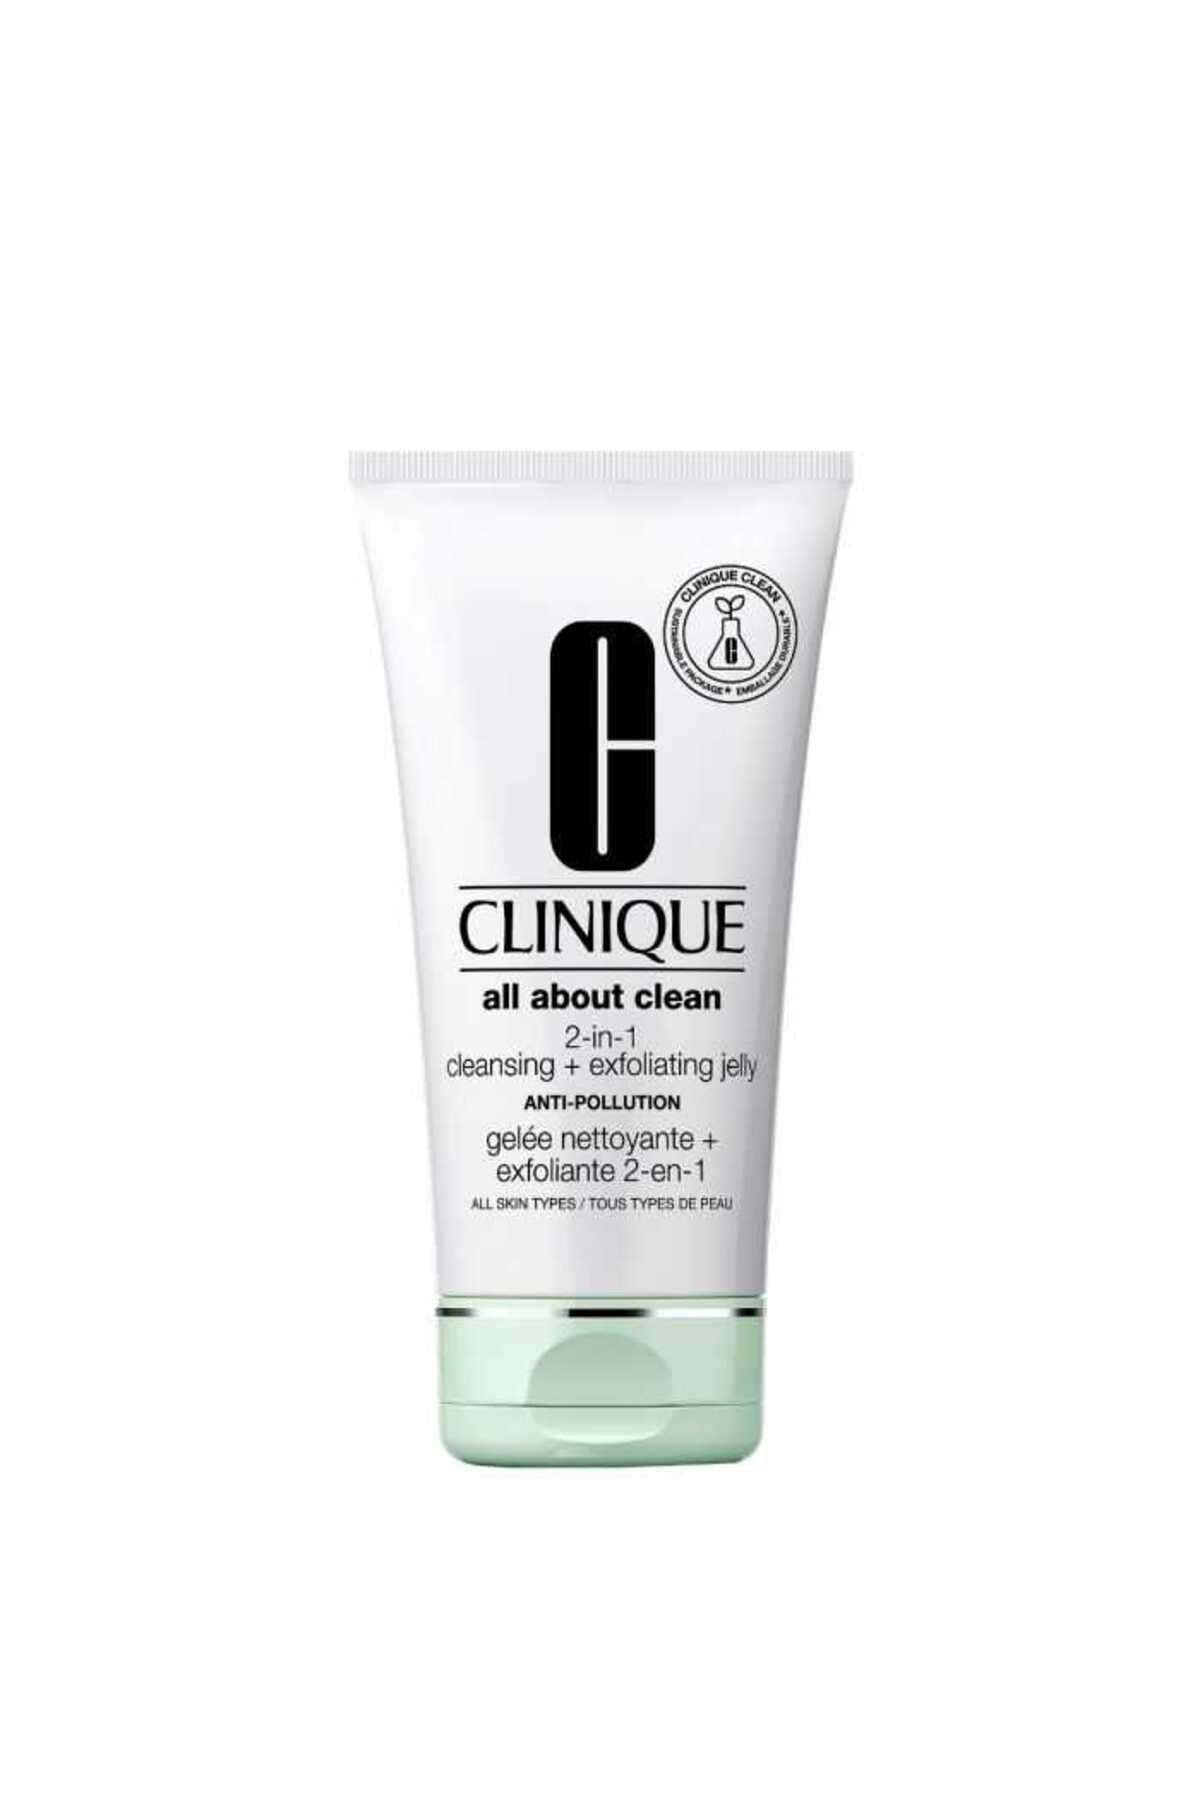 Clinique All About Clean Temizleyici Jel Peeling 150 ml